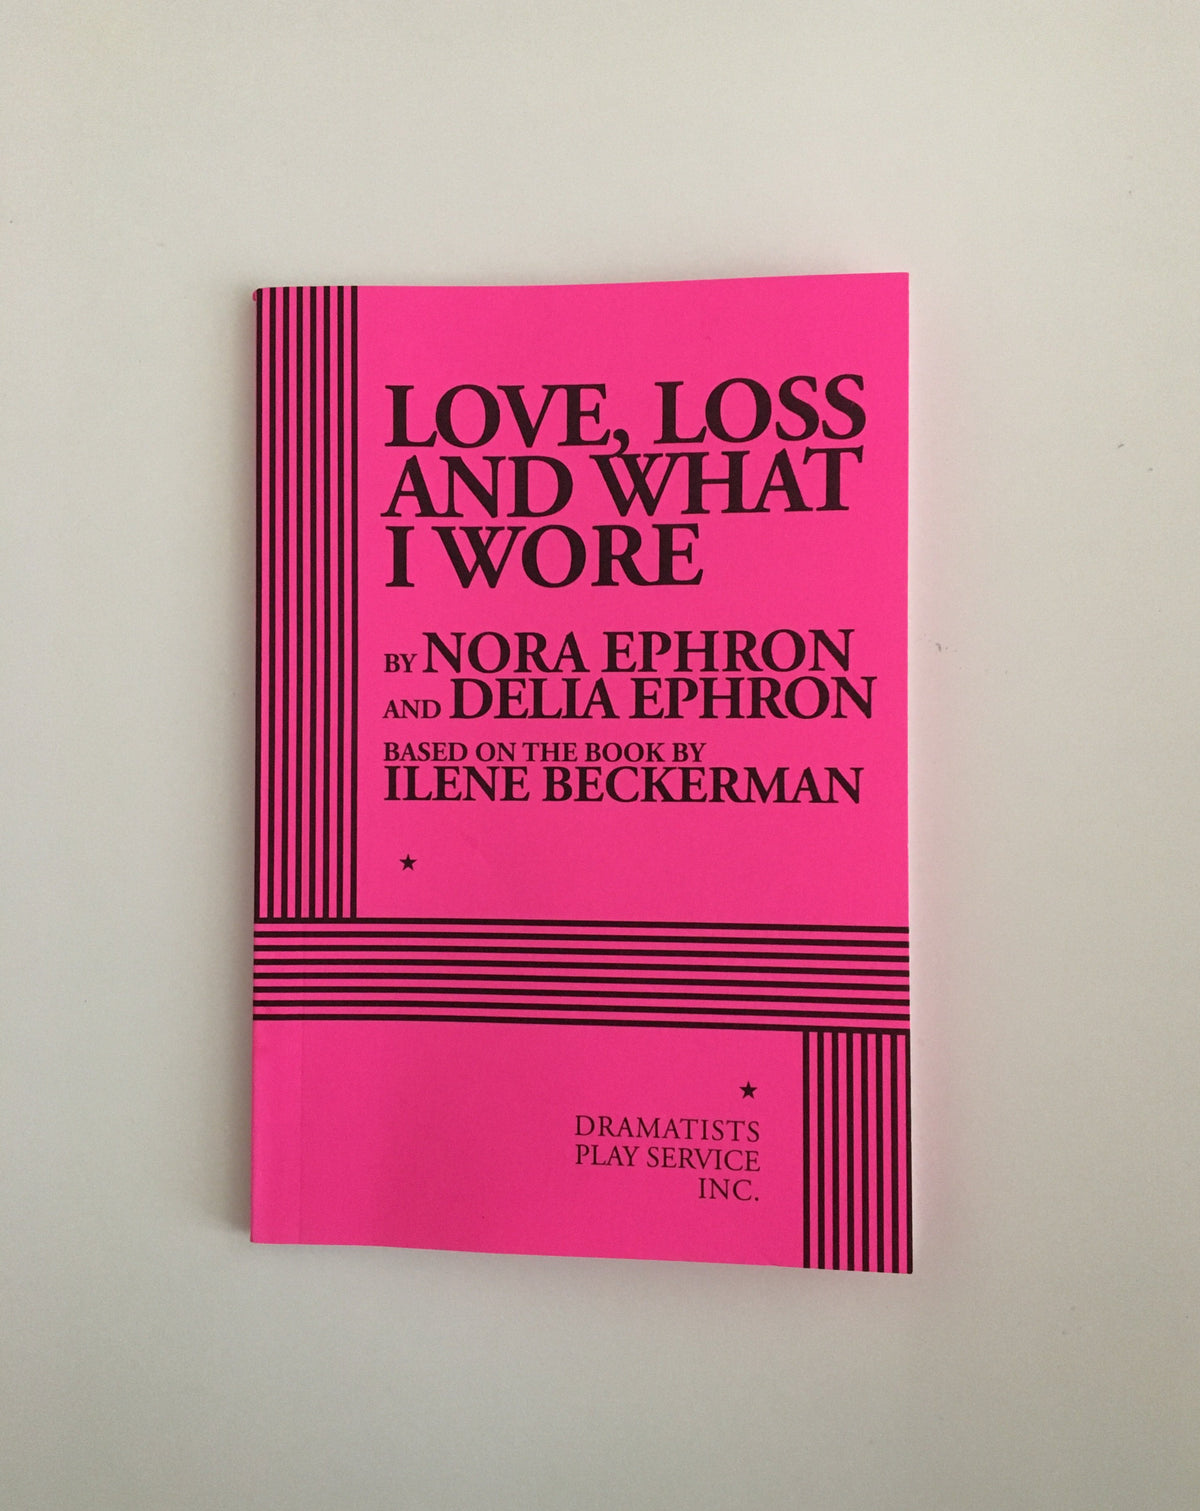 Love, Loss and What I Wore by Nora Ephron